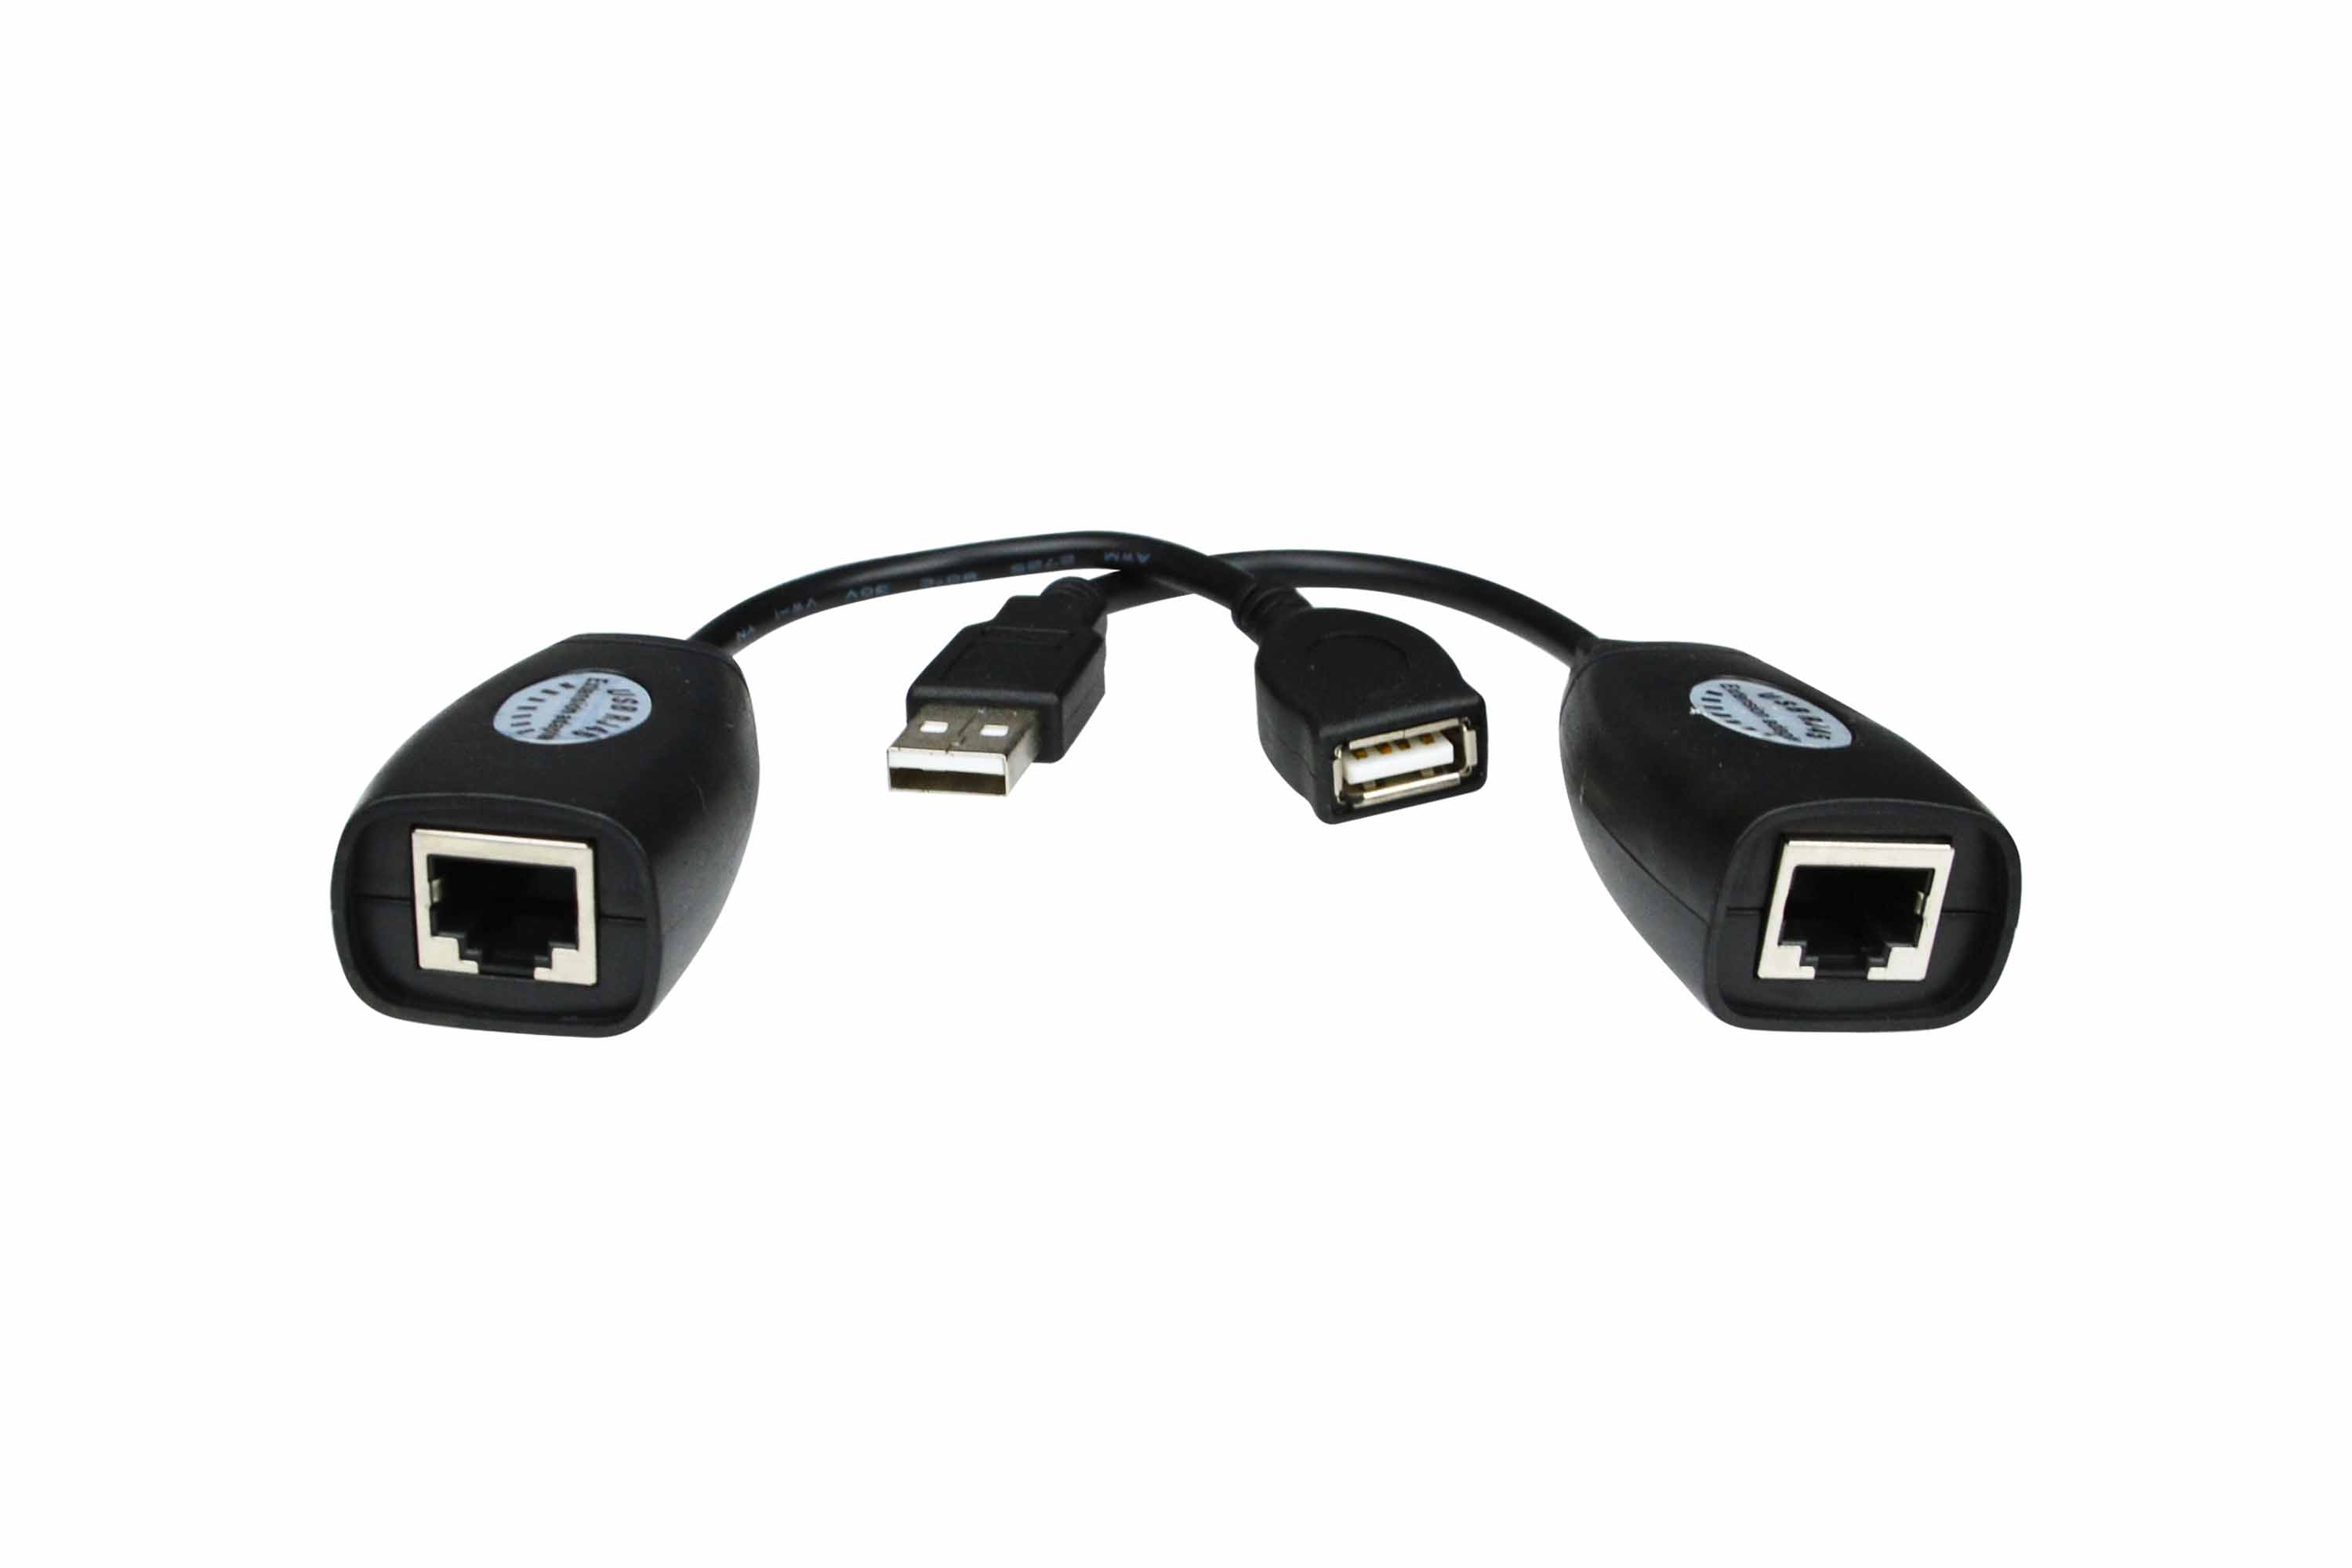 USB transmitters on CAT5 network cable for mouse extension